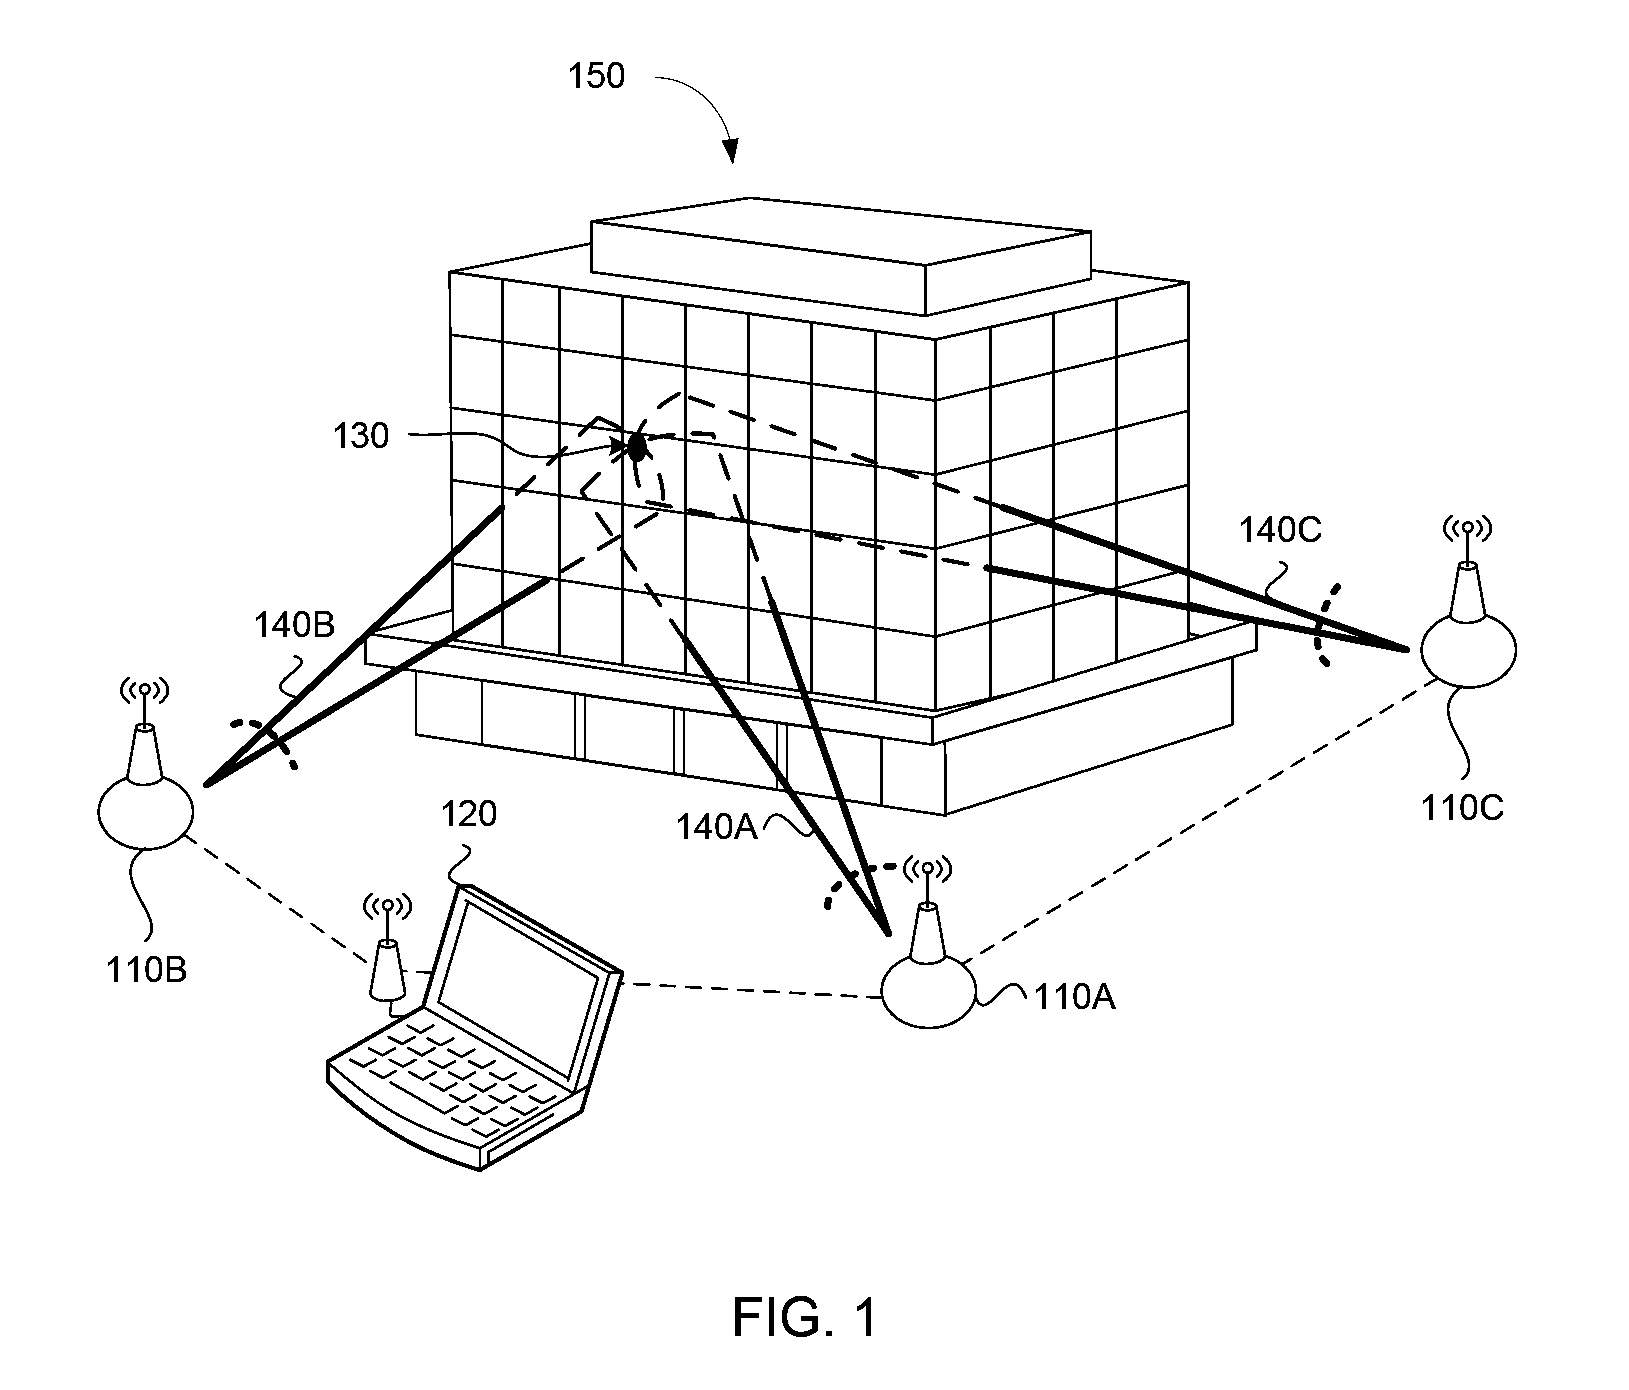 Ranging system using active radio frequency (RF) nodes